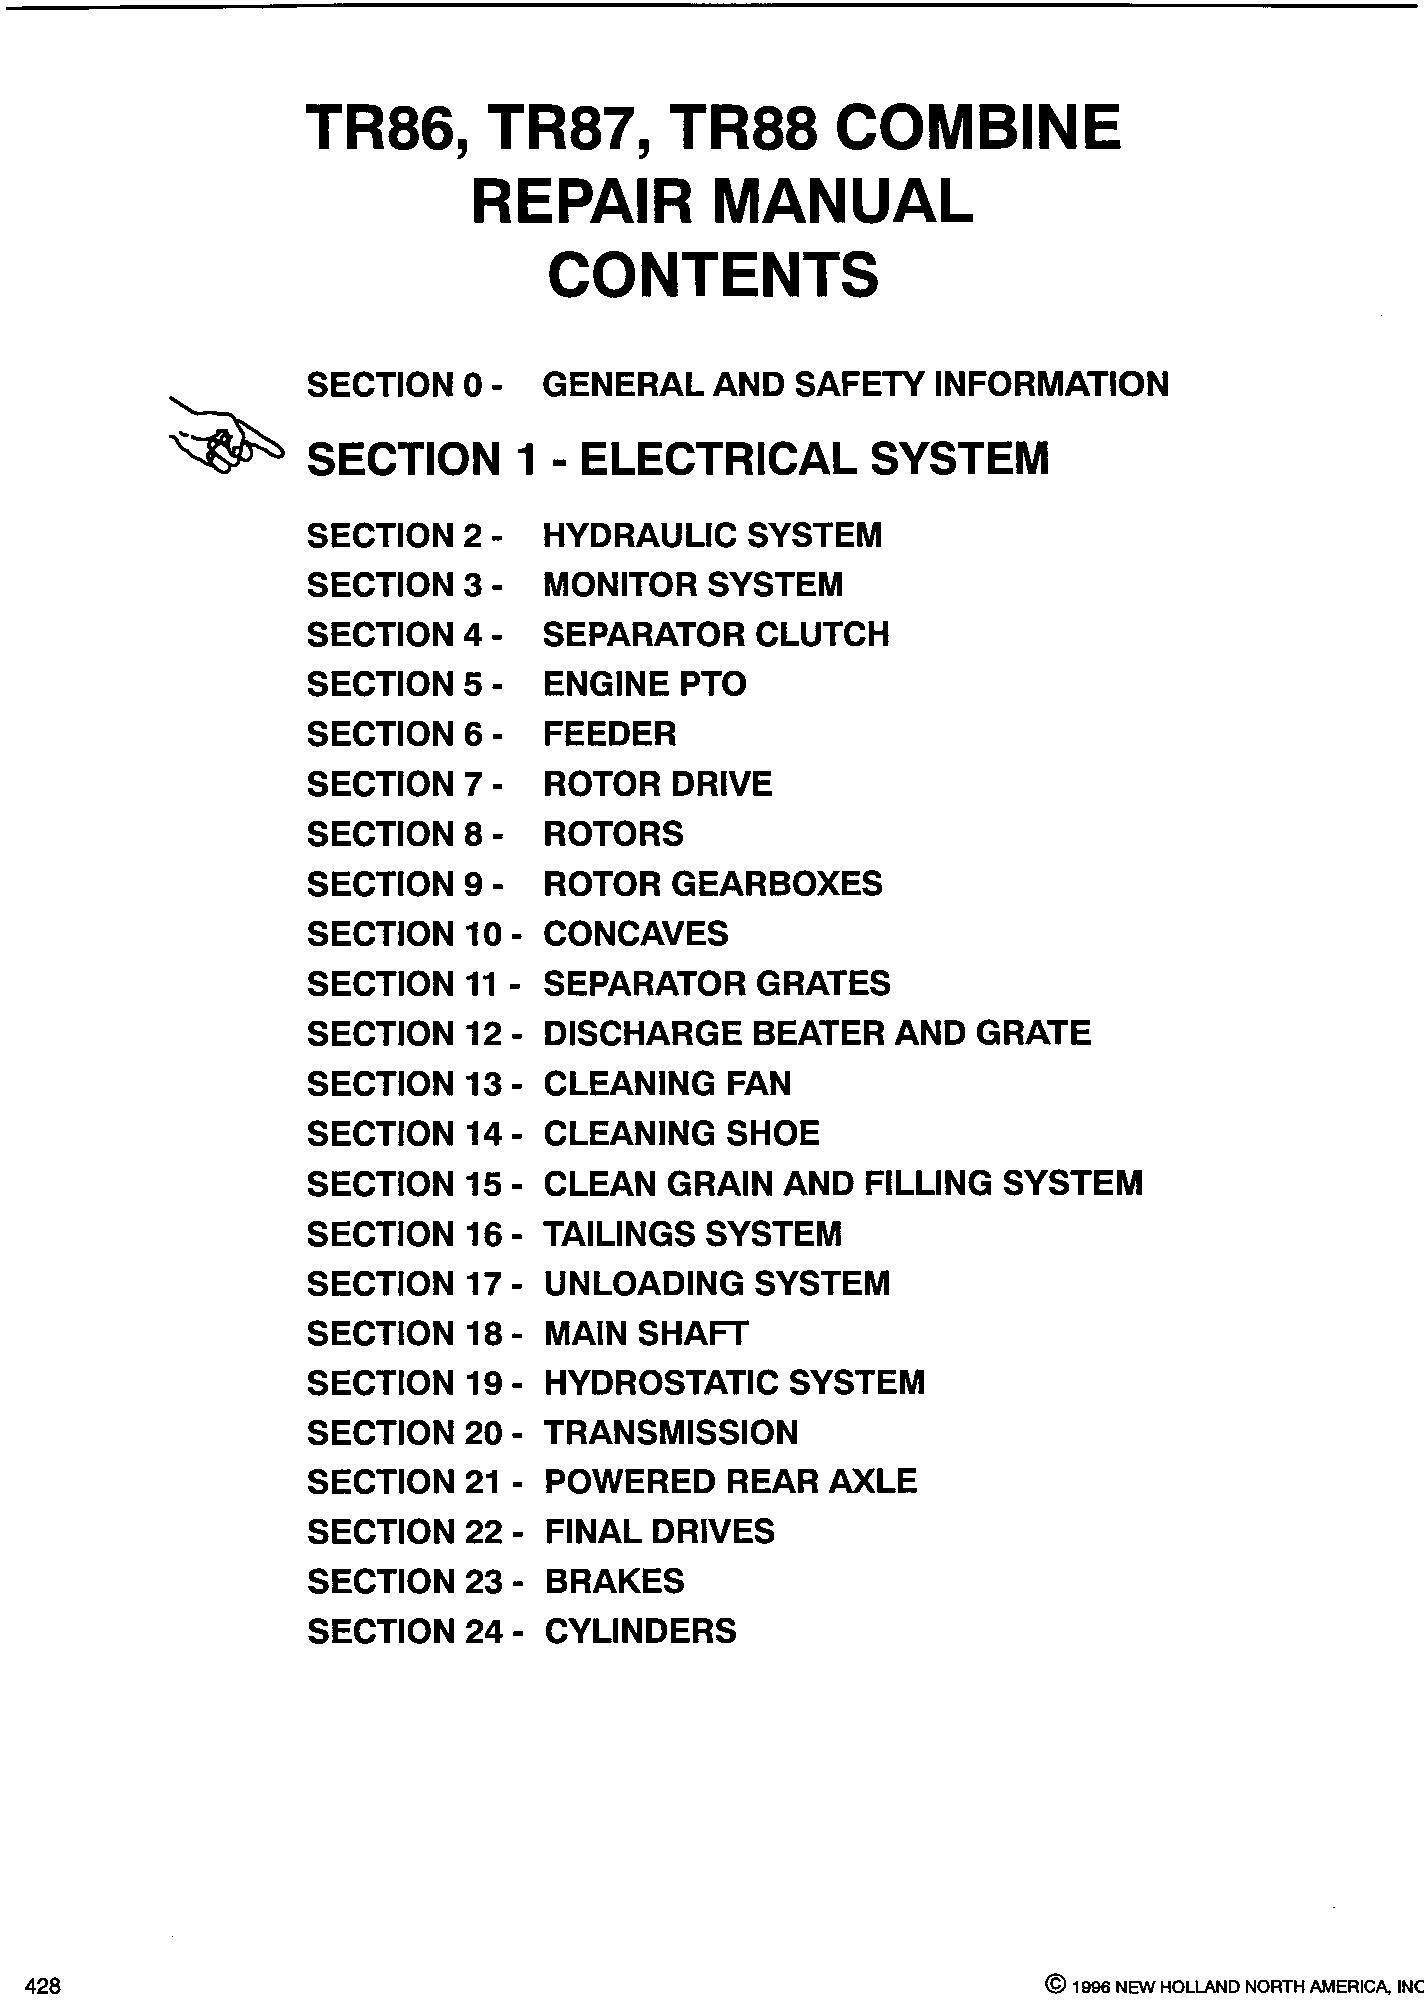 New Holland TR86, TR87, TR88 Combine Complete Service Manual - 19357